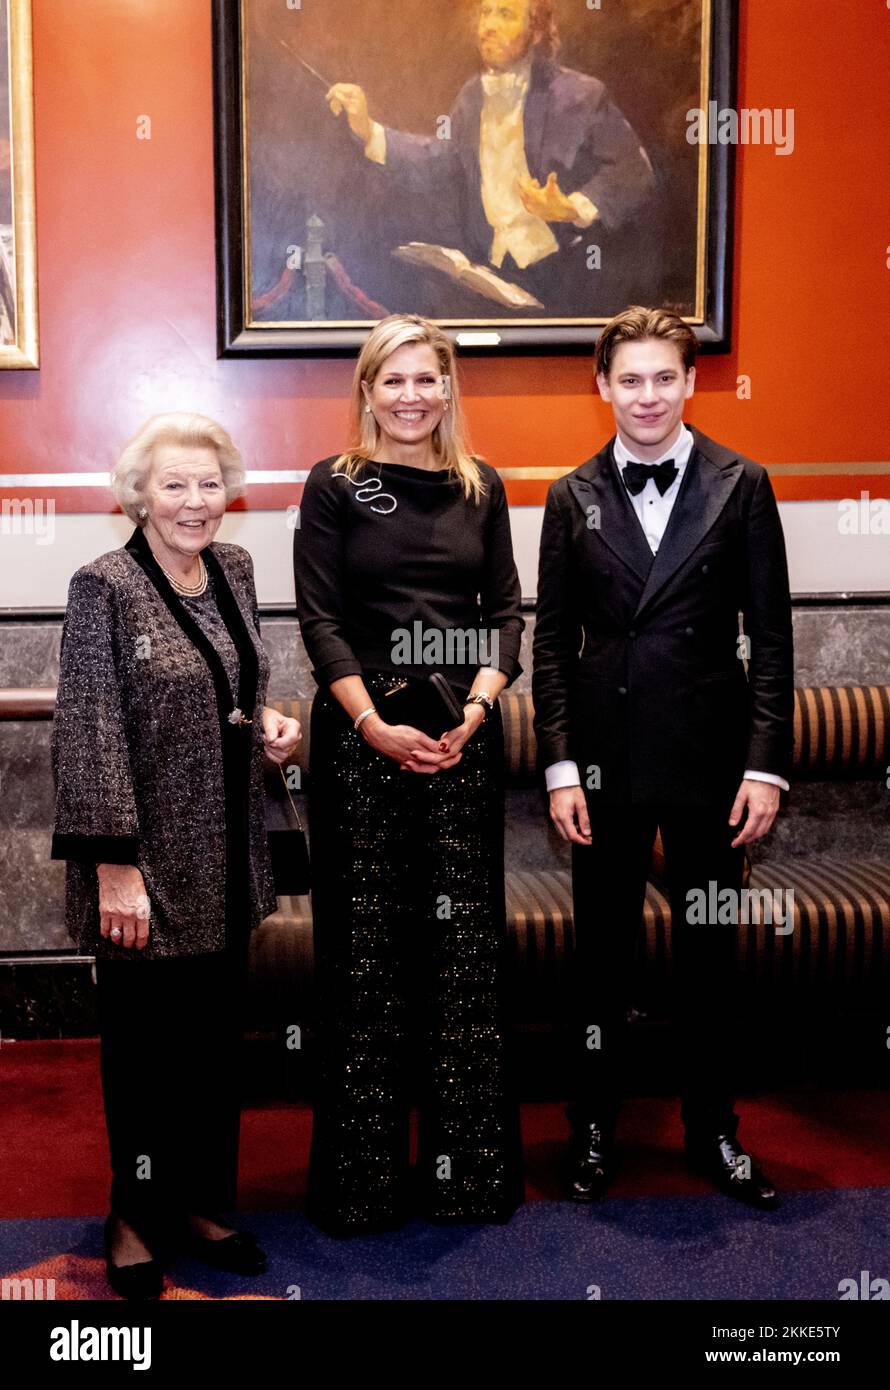 Amsterdam, Netherlands. 25th Nov, 2022. AMSTERDAM - Queen Maxima and Princess Beatrix meet conductor Klaus Makela in the conductor's foyer of the Concertgebouw. They visited a concert by the Royal Concertgebouw Orchestra, conducted by the 26-year-old future chief conductor. Queen Maxima is the patroness of the orchestra. ANP ROBIN UTRECHT netherlands out - belgium out Credit: ANP/Alamy Live News Stock Photo